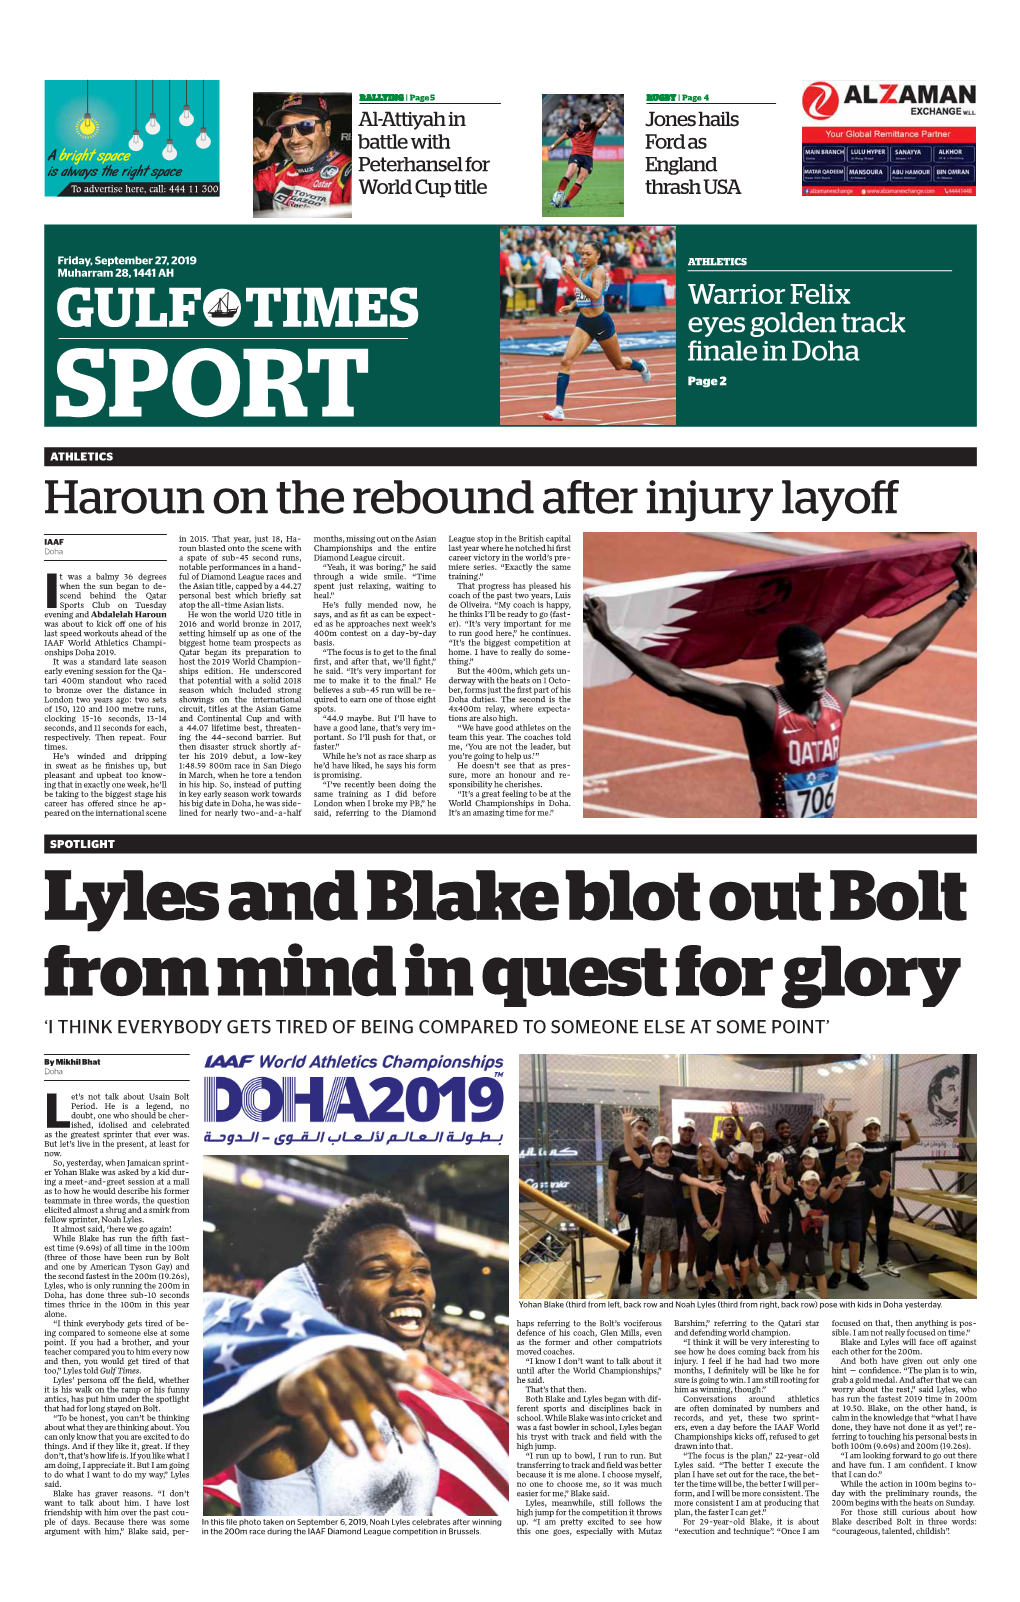 GULF TIMES Eyes Golden Track Fi Nale in Doha SPORT Page 2